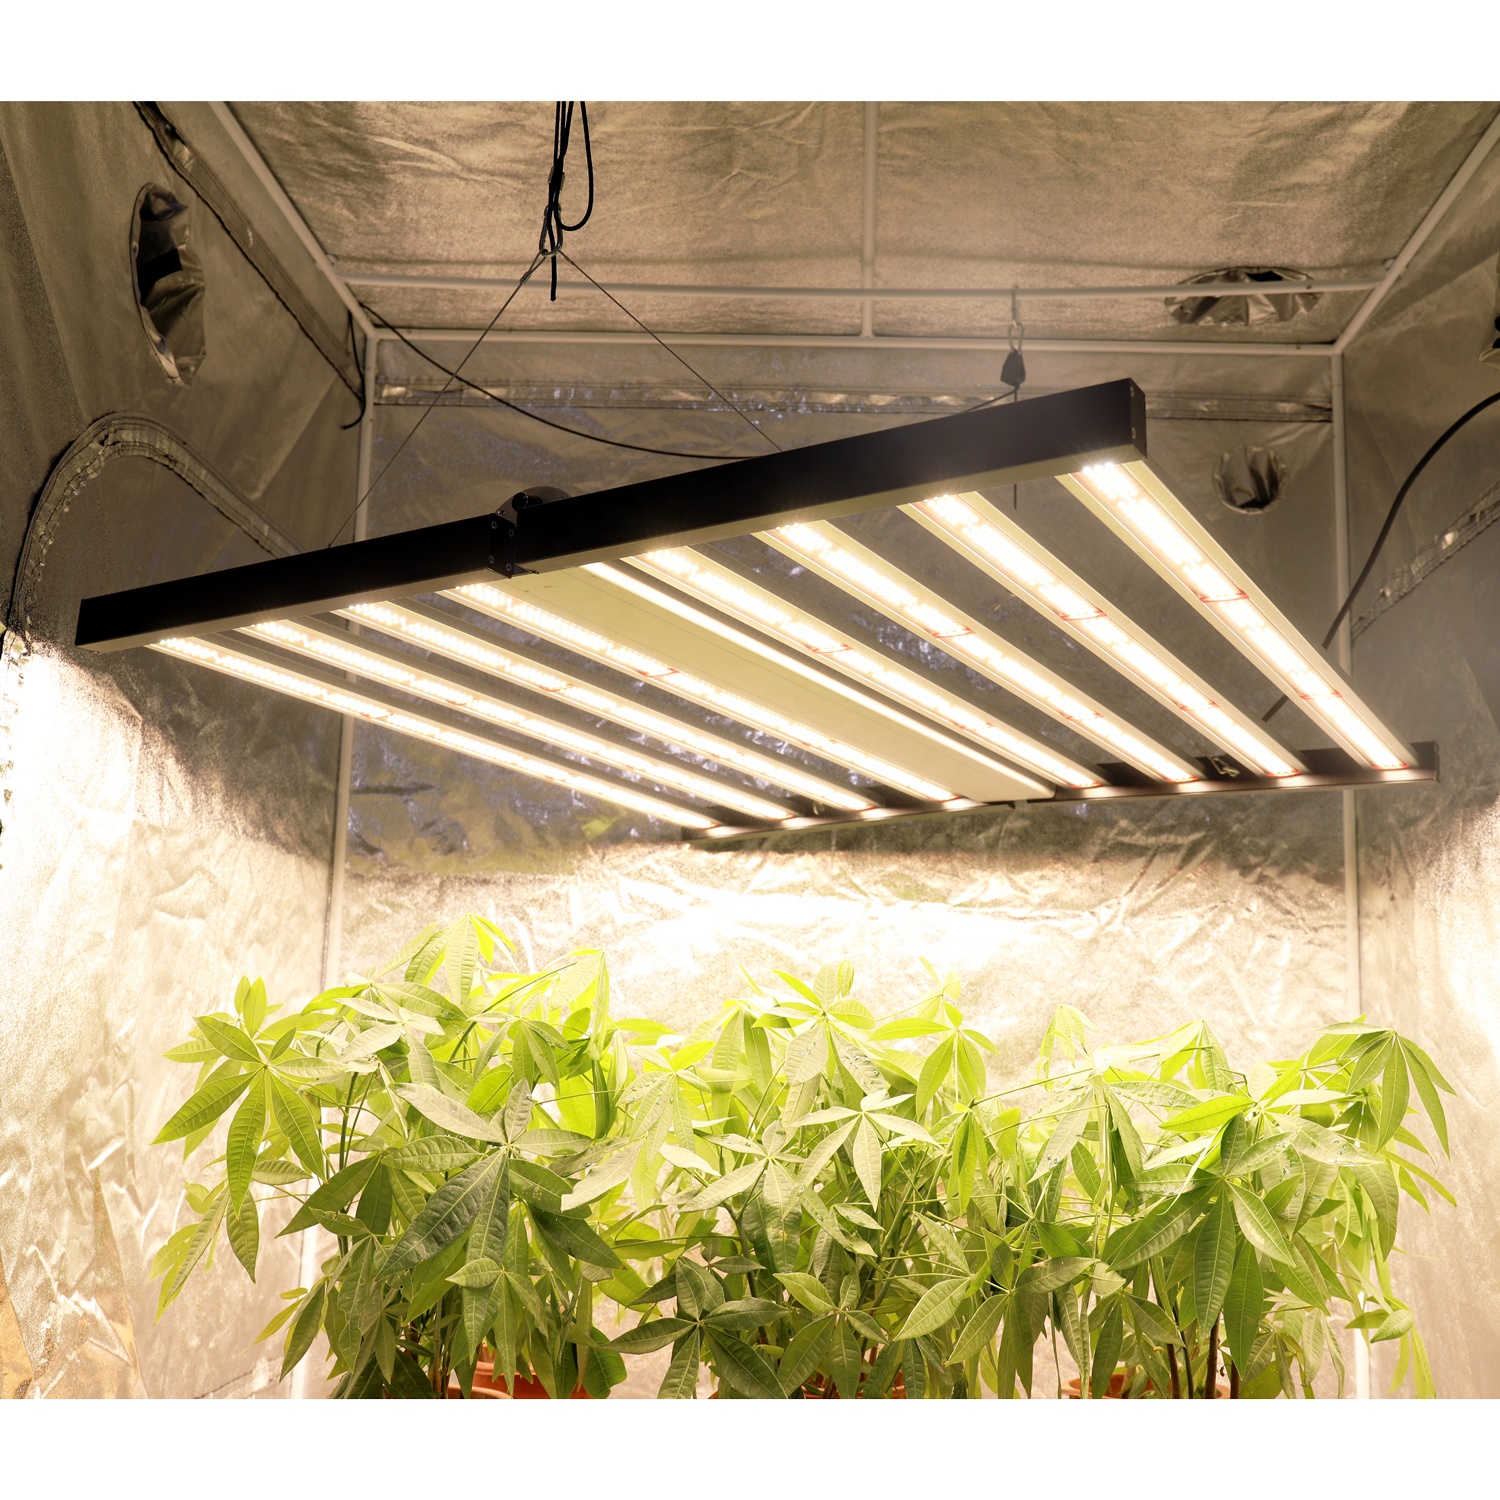 Full-Spectrum-Light-Panel-510W-Hydroponic-Dimmable-Full-Spectrum-Indoor-Plant-Led-Grow-Lamp-Bar